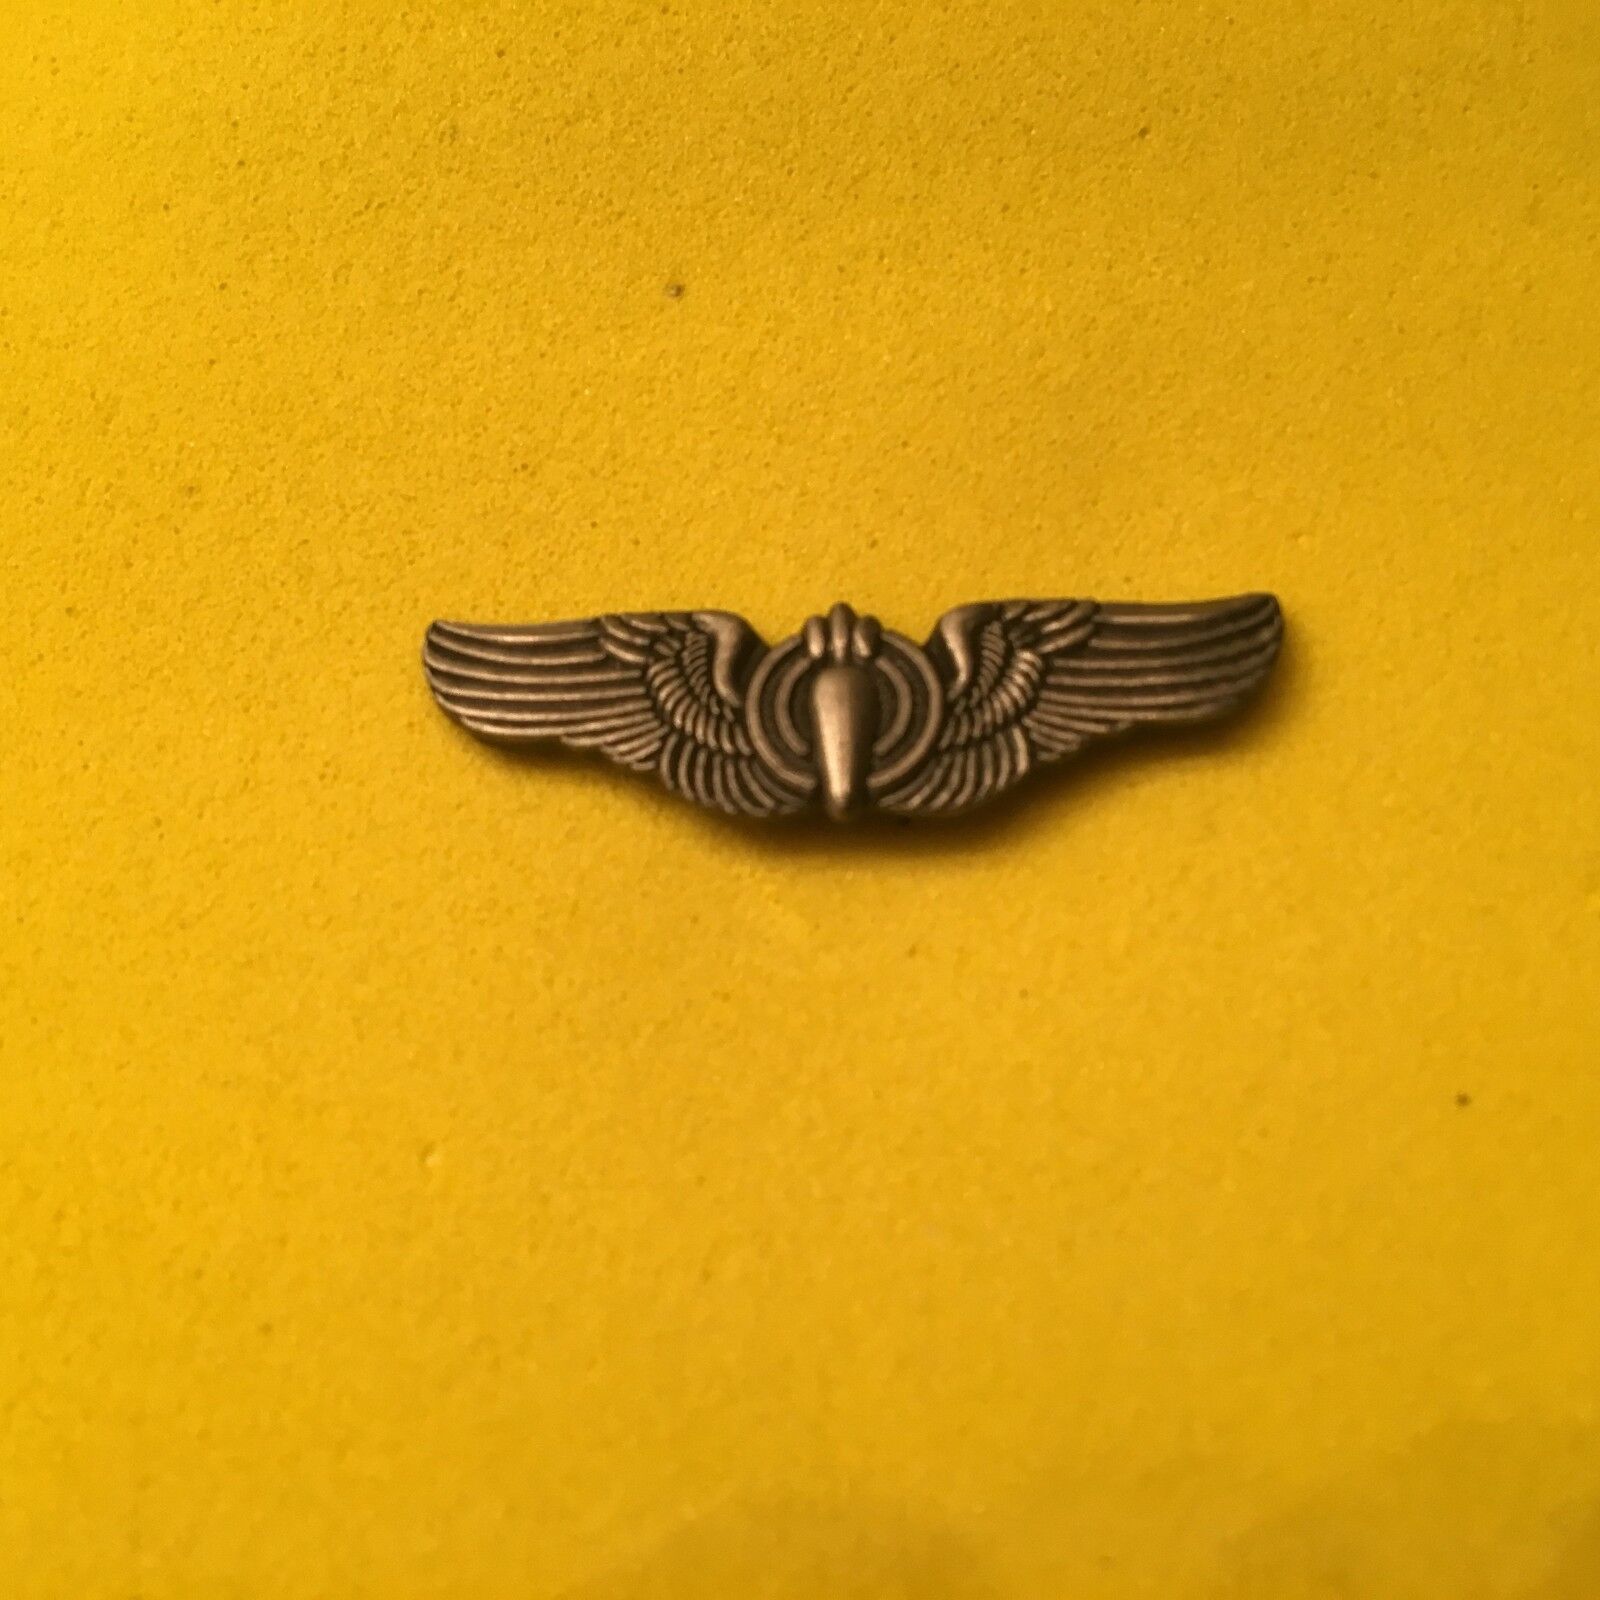 USAF BOMBARDIER HAT/LAPEL PIN SILVER  MEASURES 1 3/16 INCHES